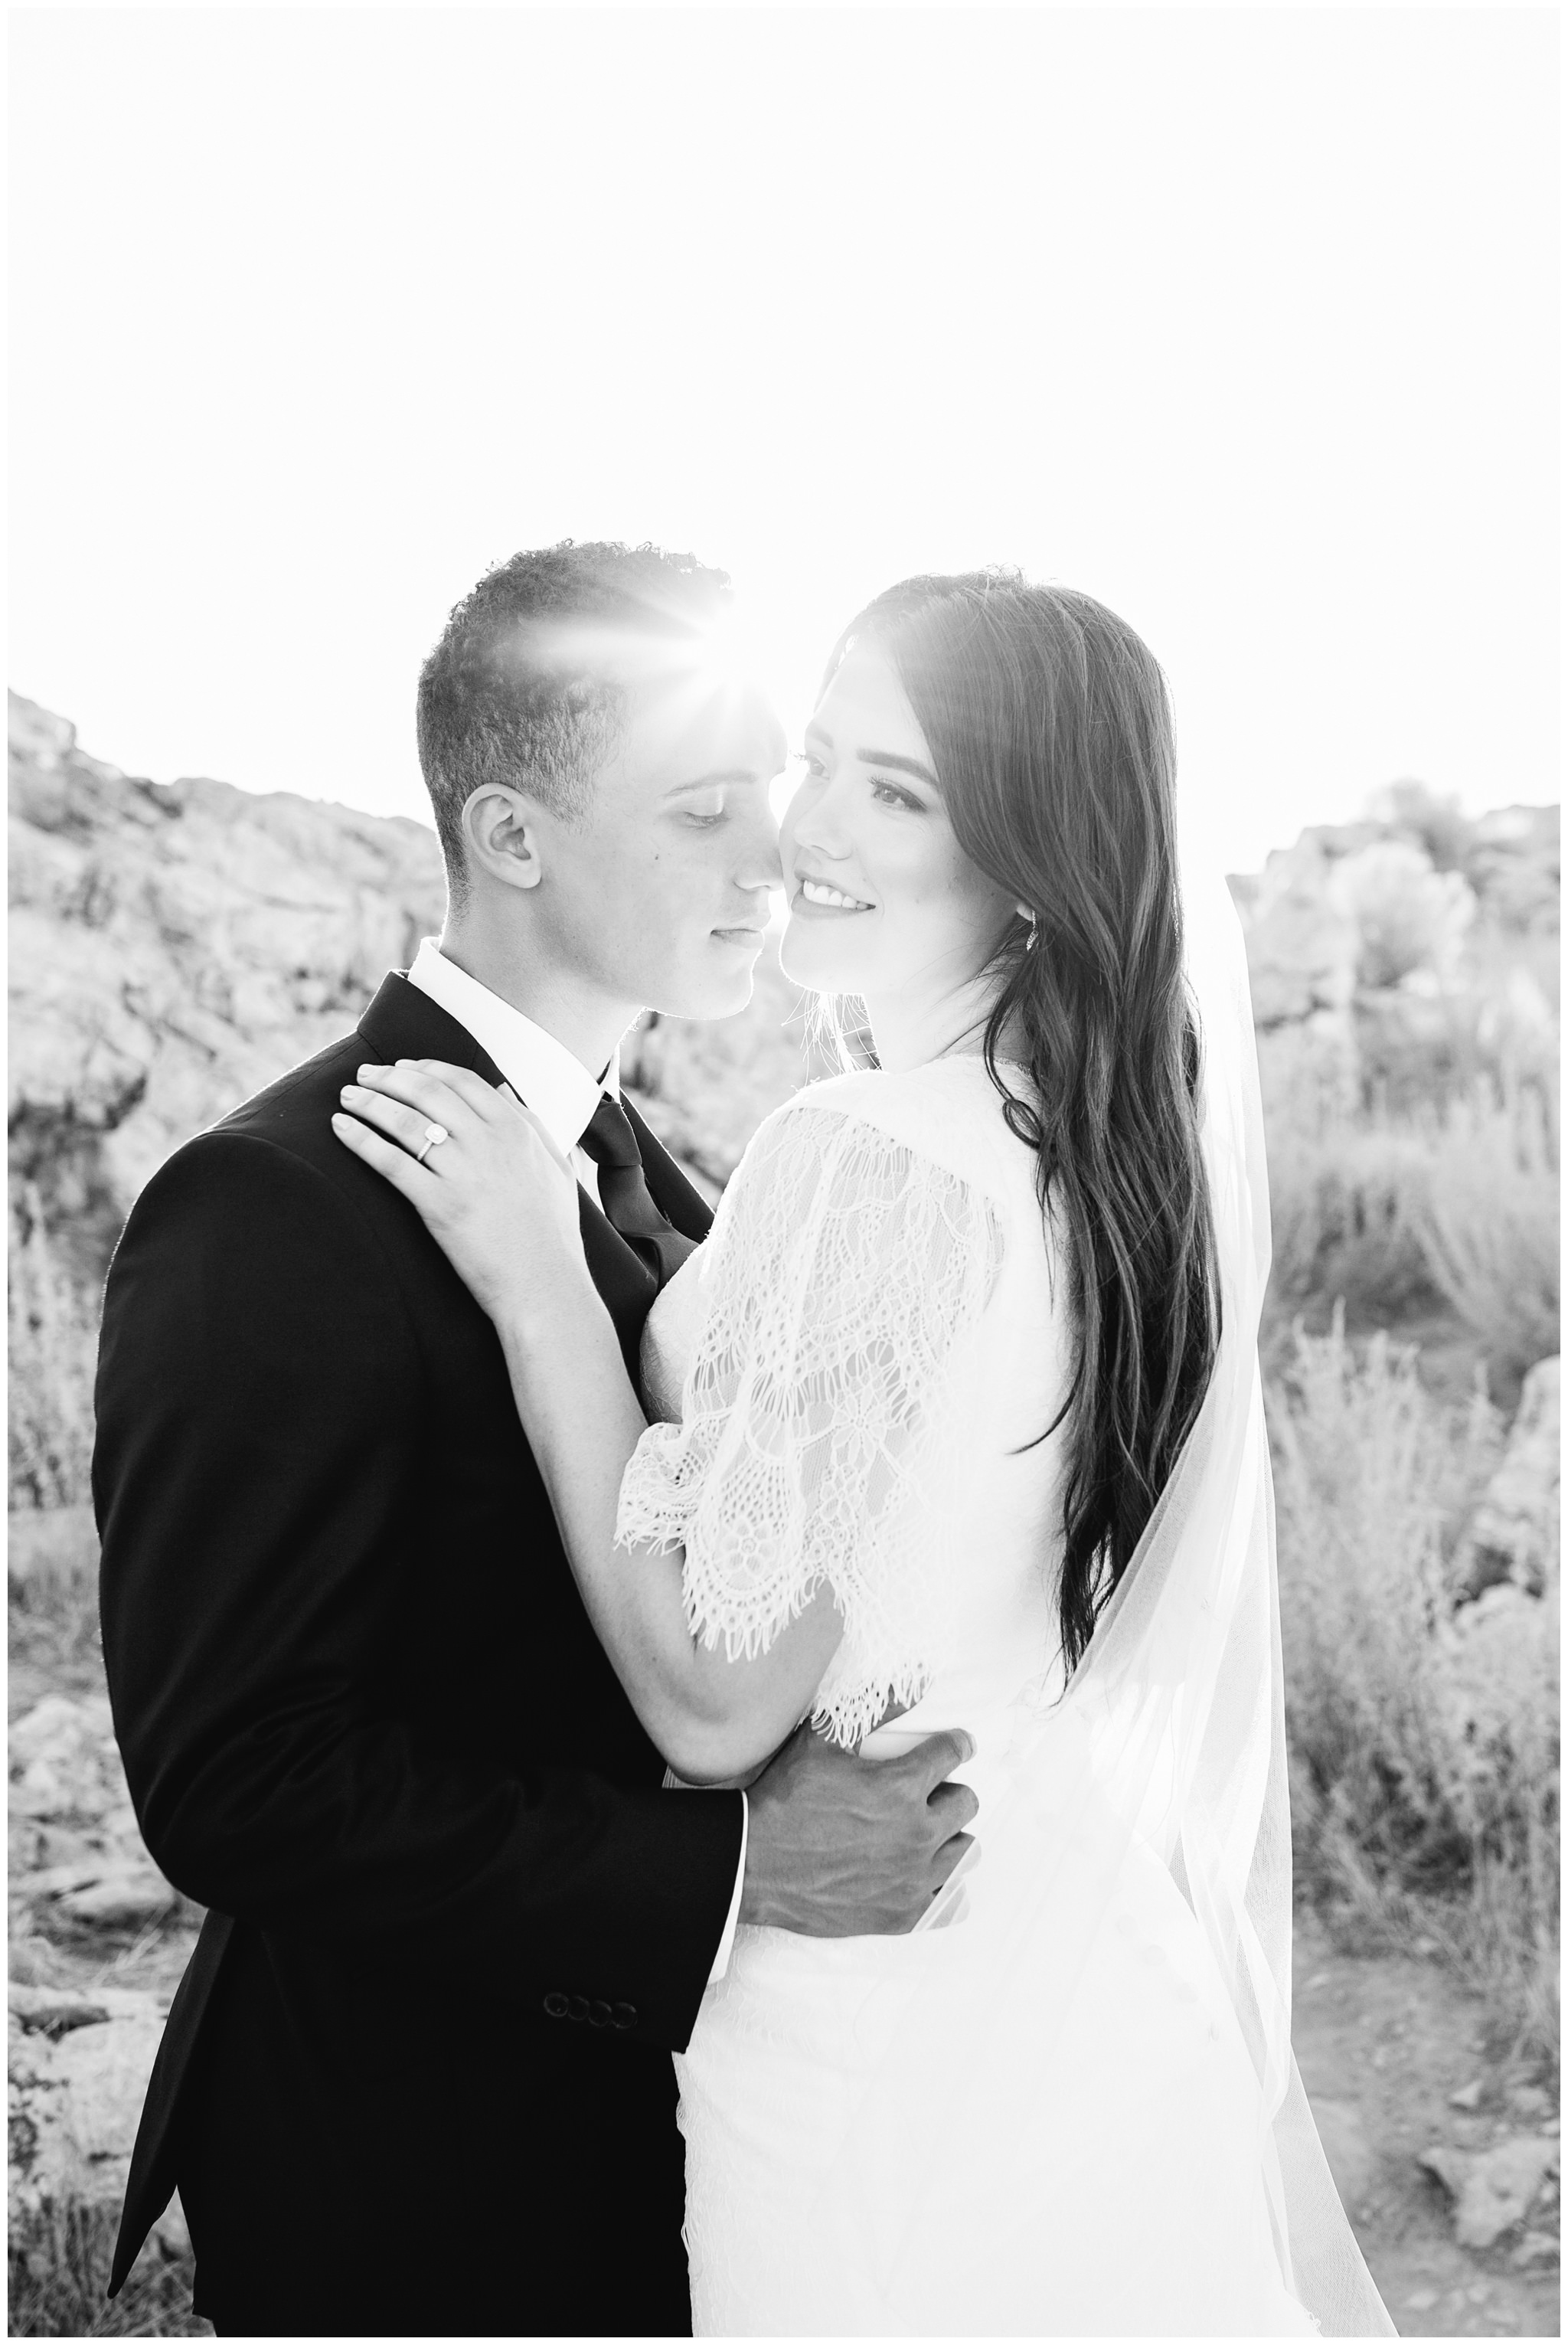 Groom tickling bride with his nose making her laugh for the wedding pictures in Utah